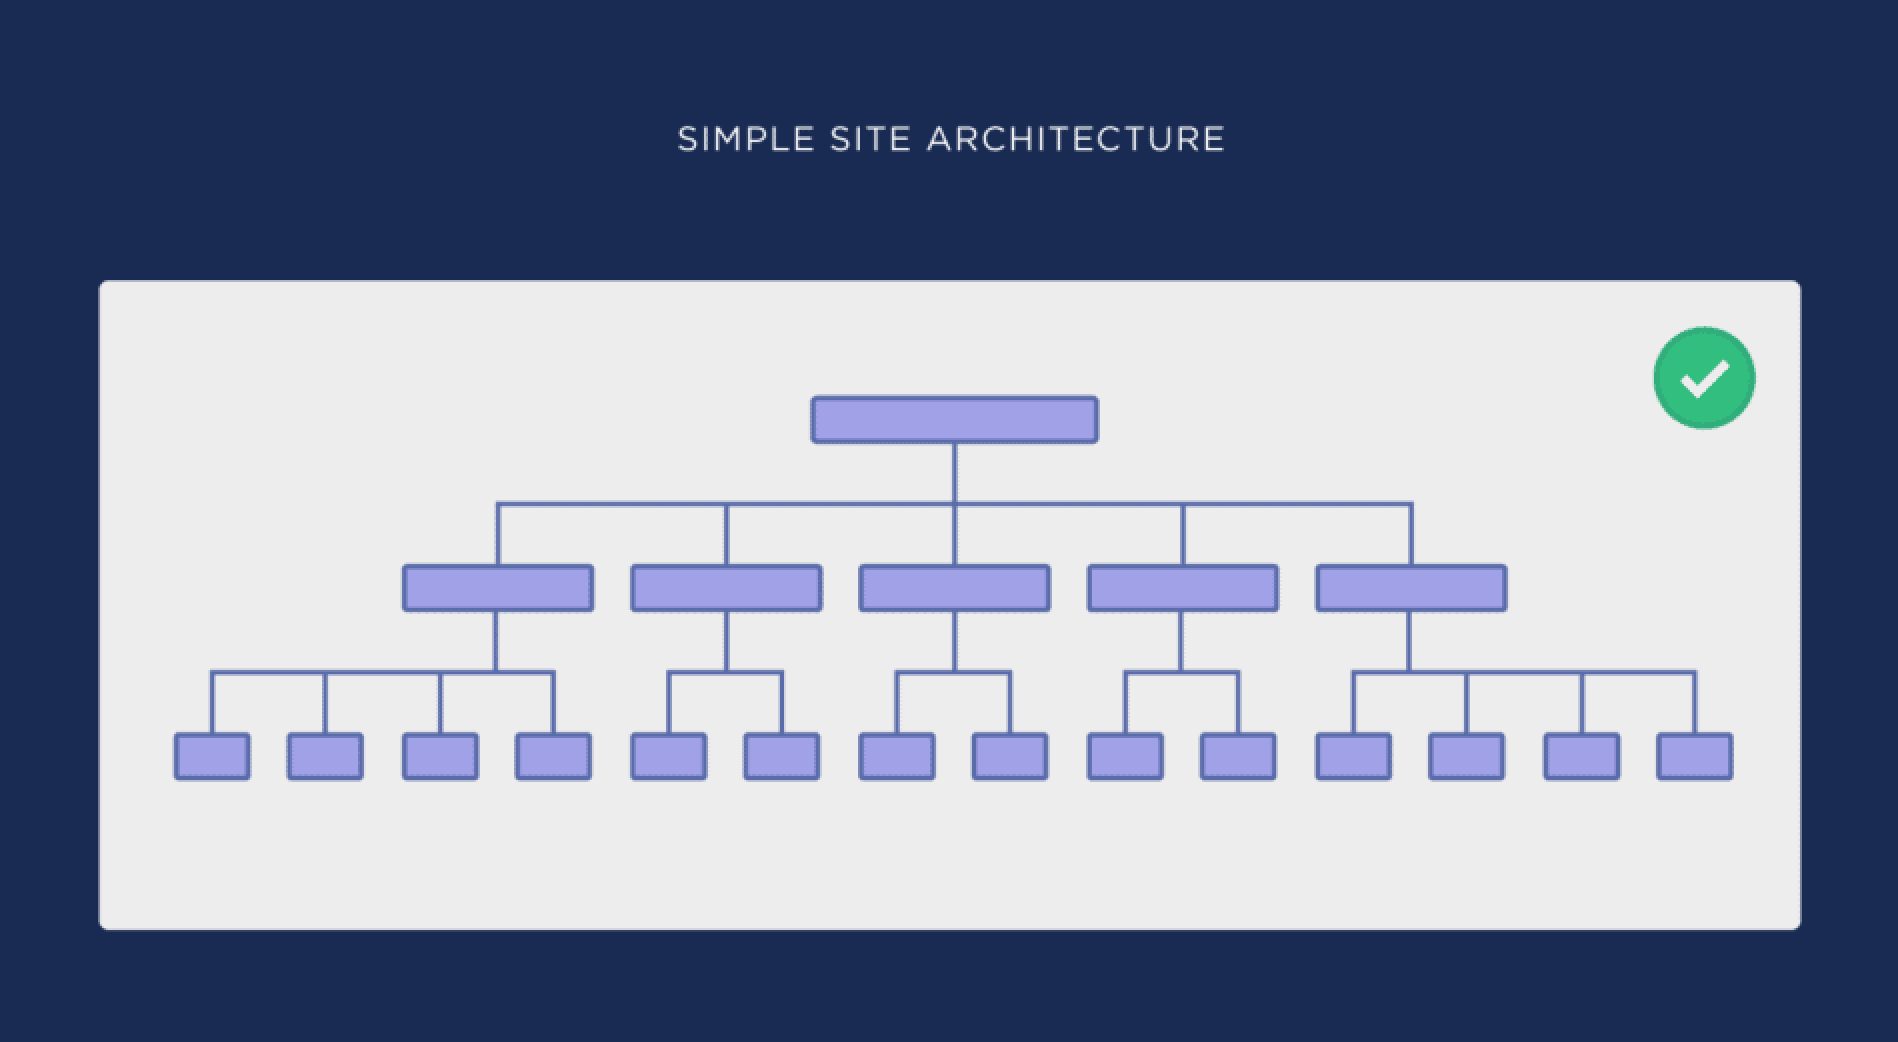 Infographic of simple (flat) site architecture